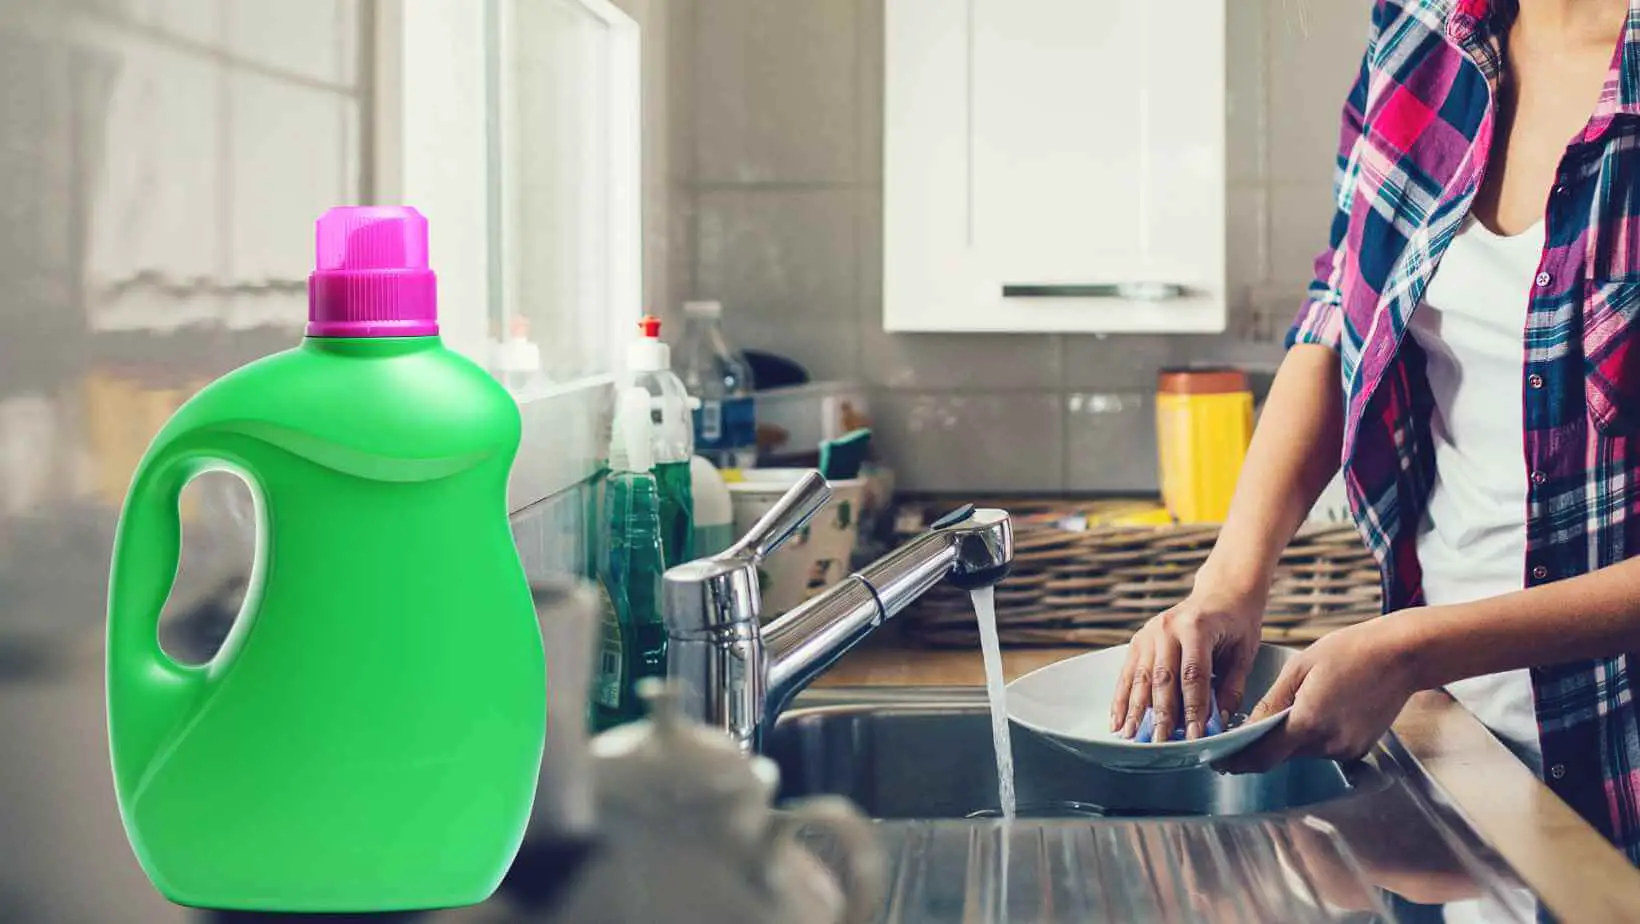 Can You Use Laundry Detergent to Wash Dishes